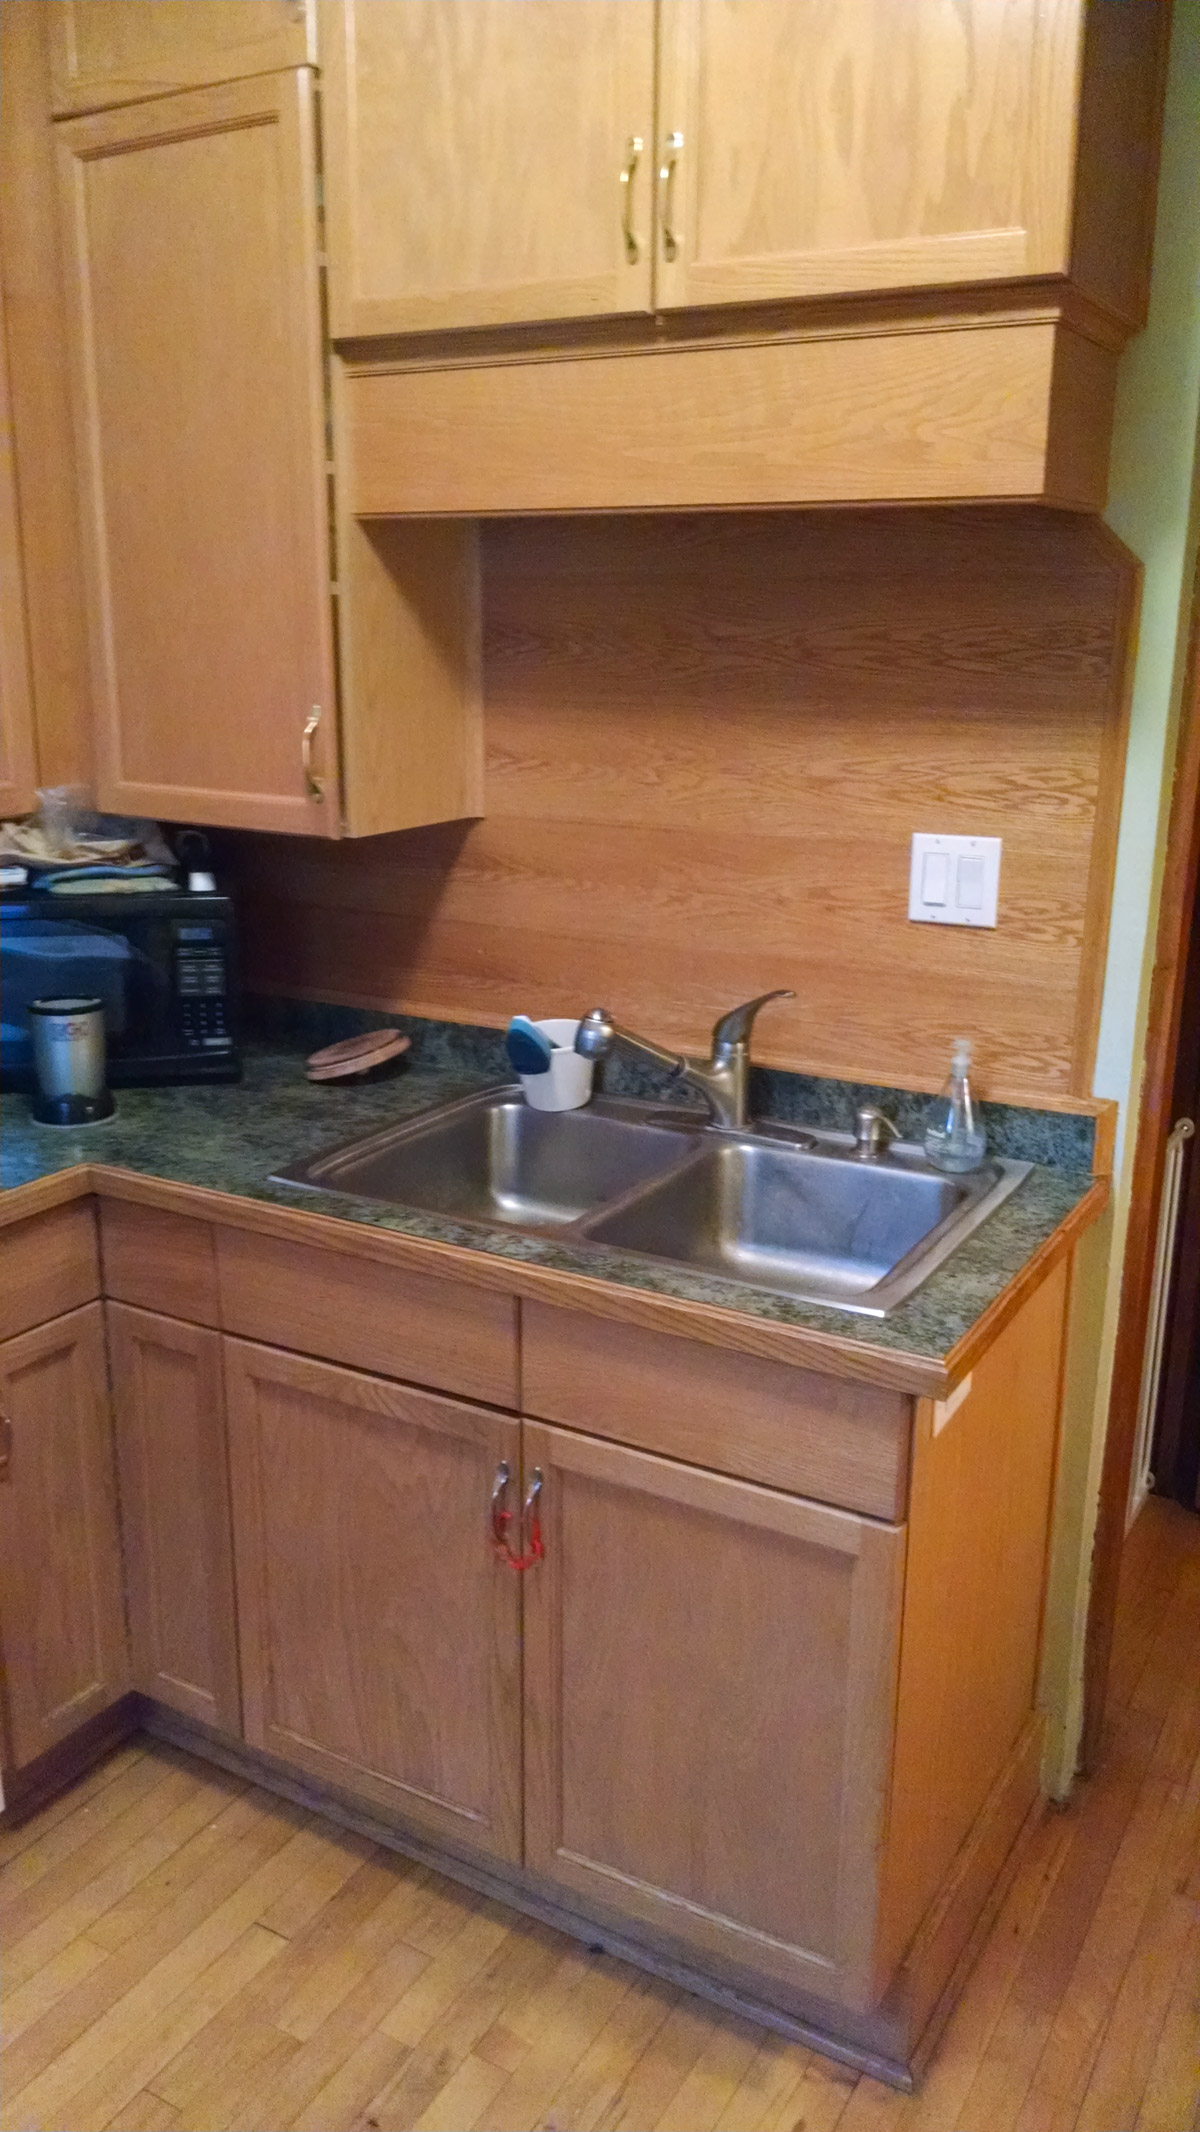 A before photo of the kitchen with the old floor to ceiling tan oak cabinets.